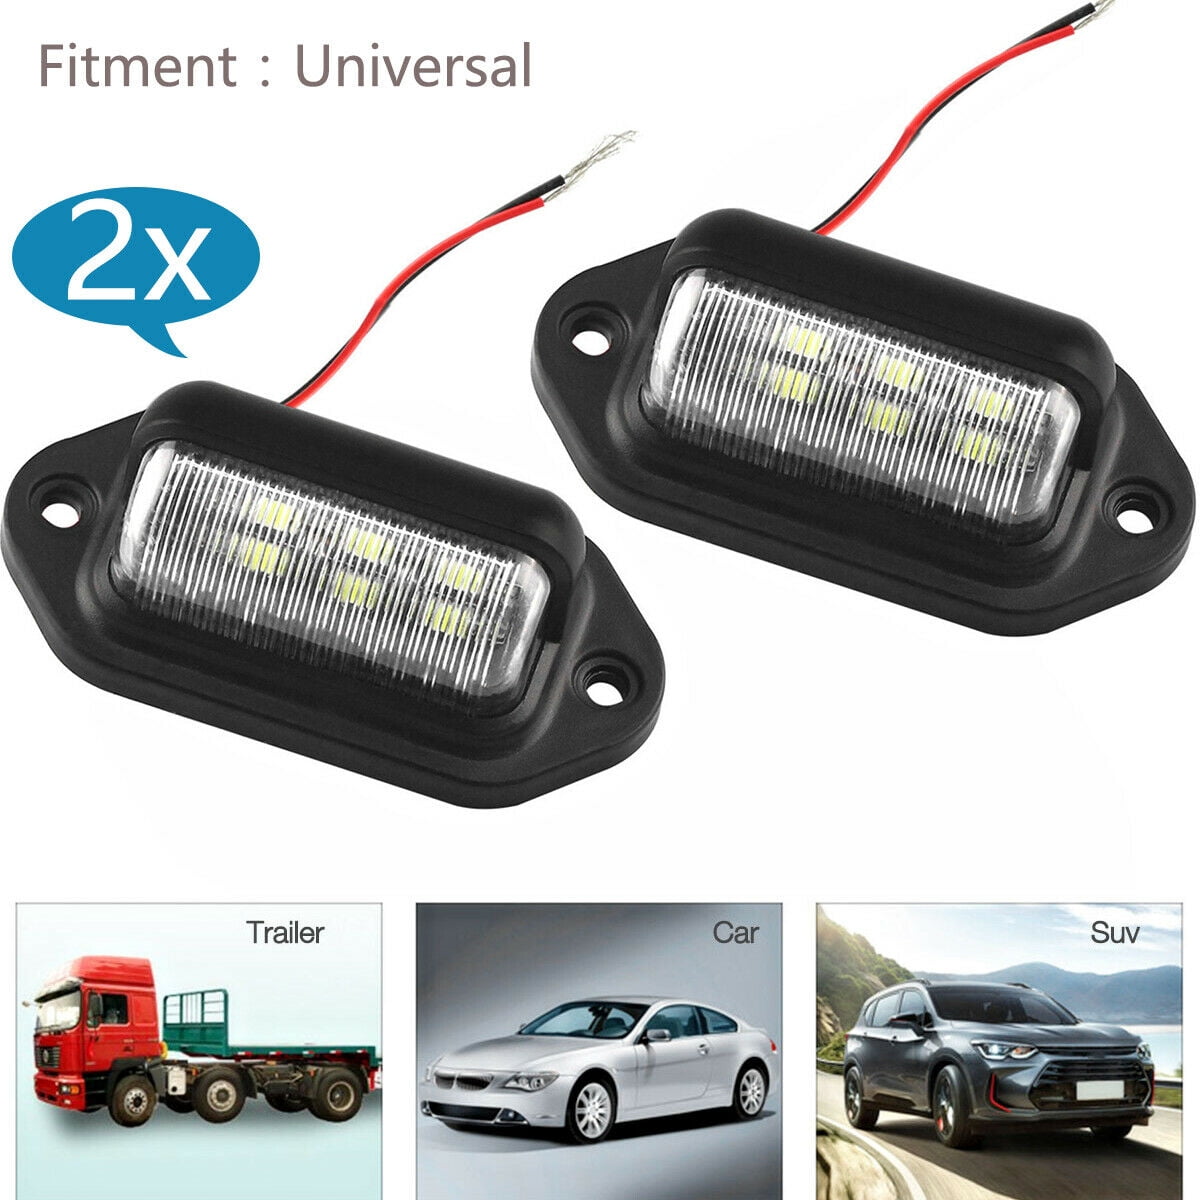 Universal 6-SMD LED License Plate Tag Lights Lamps for Truck SUV Trailer Van